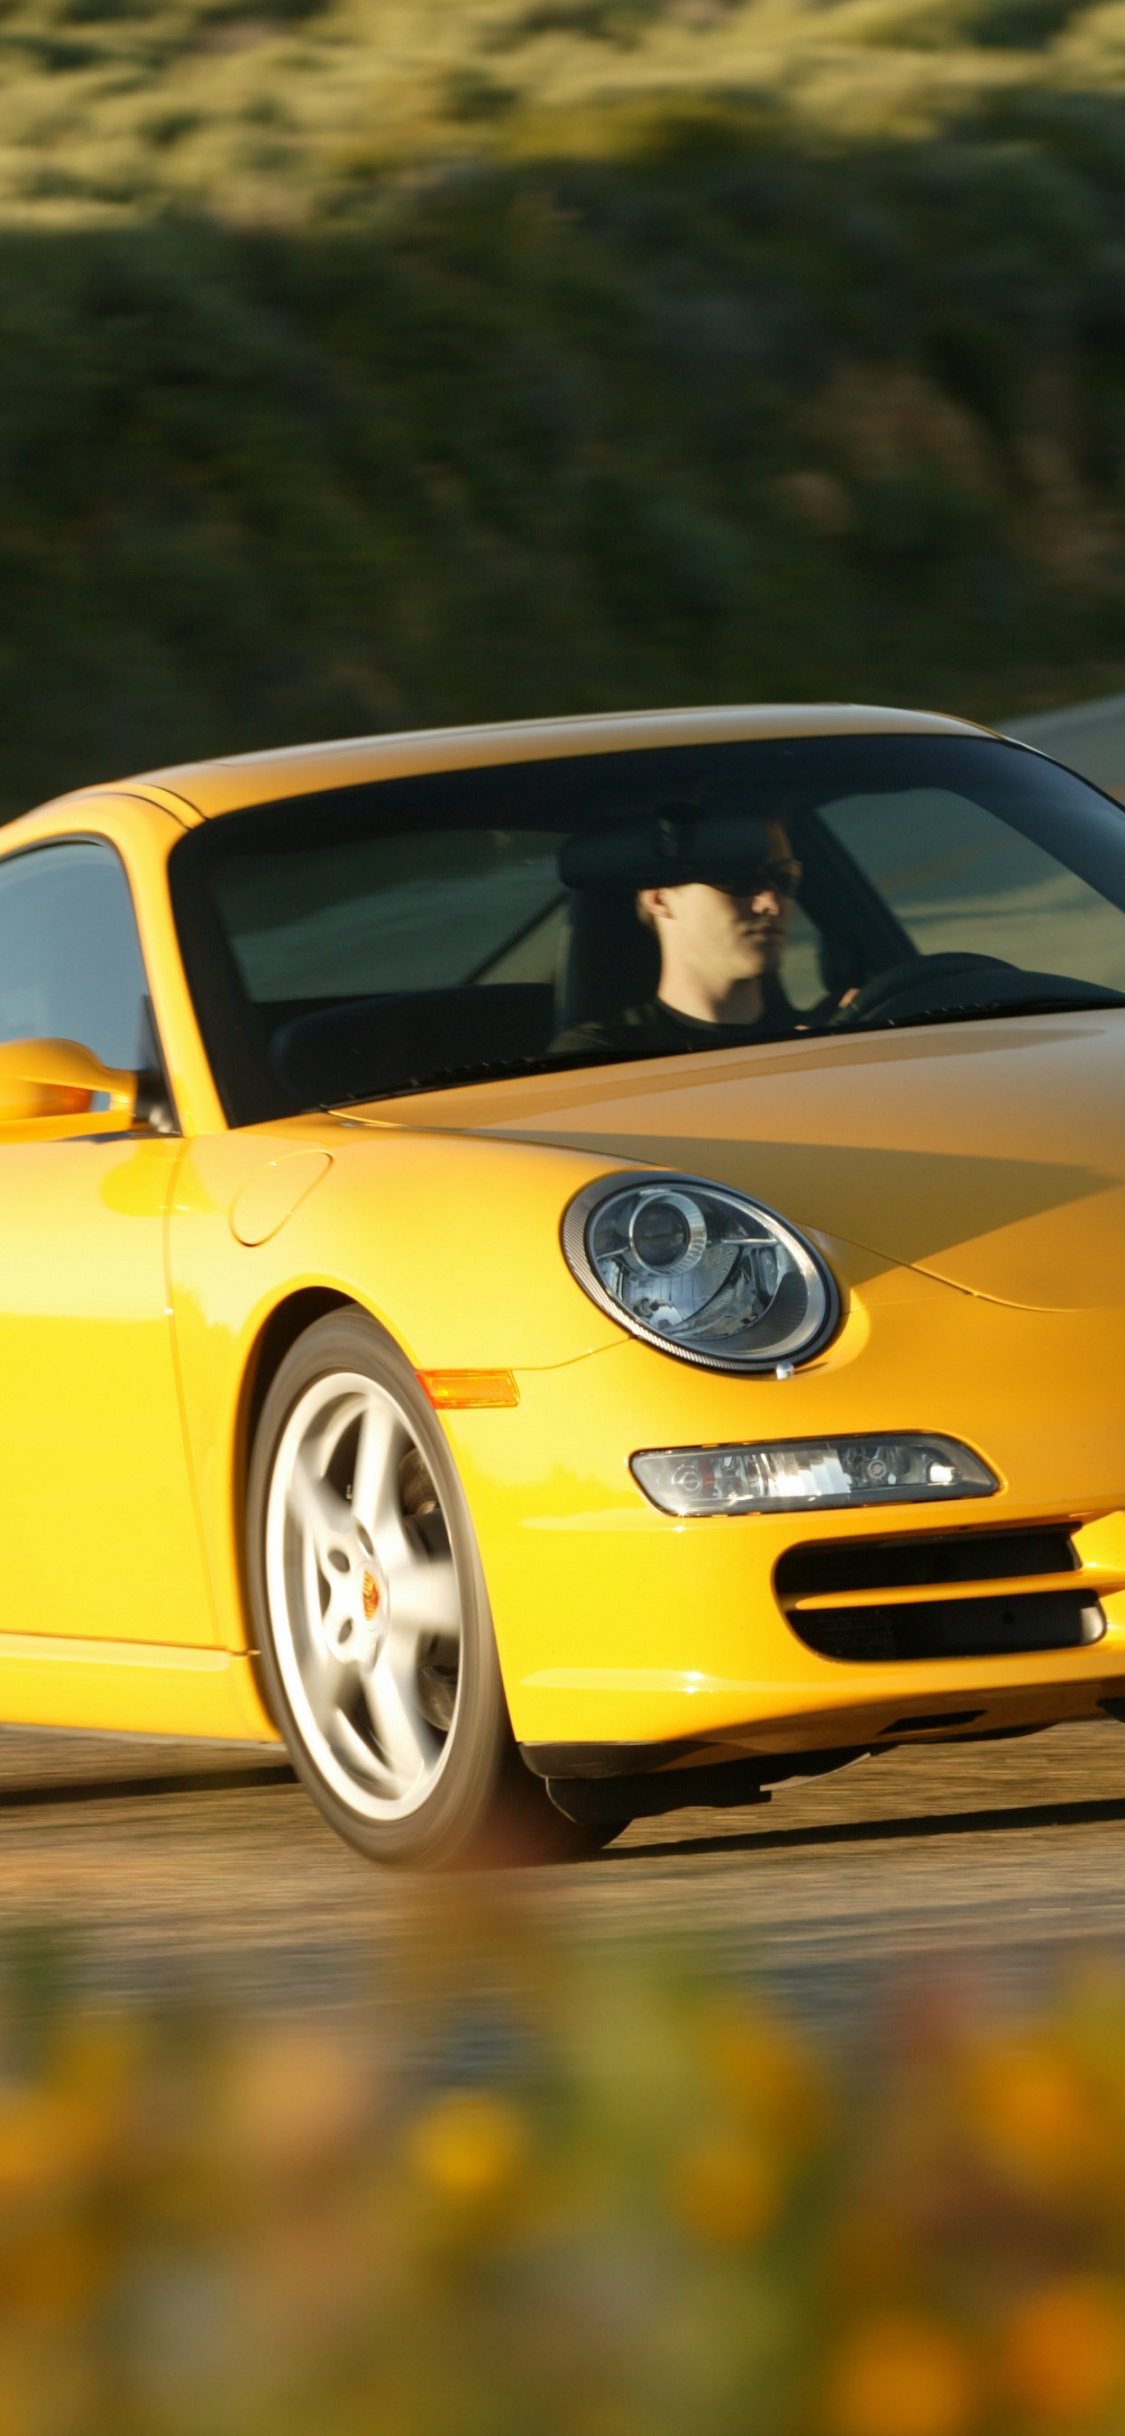 Yellow Porsche 911 on Road During Daytime. Wallpaper in 1125x2436 Resolution